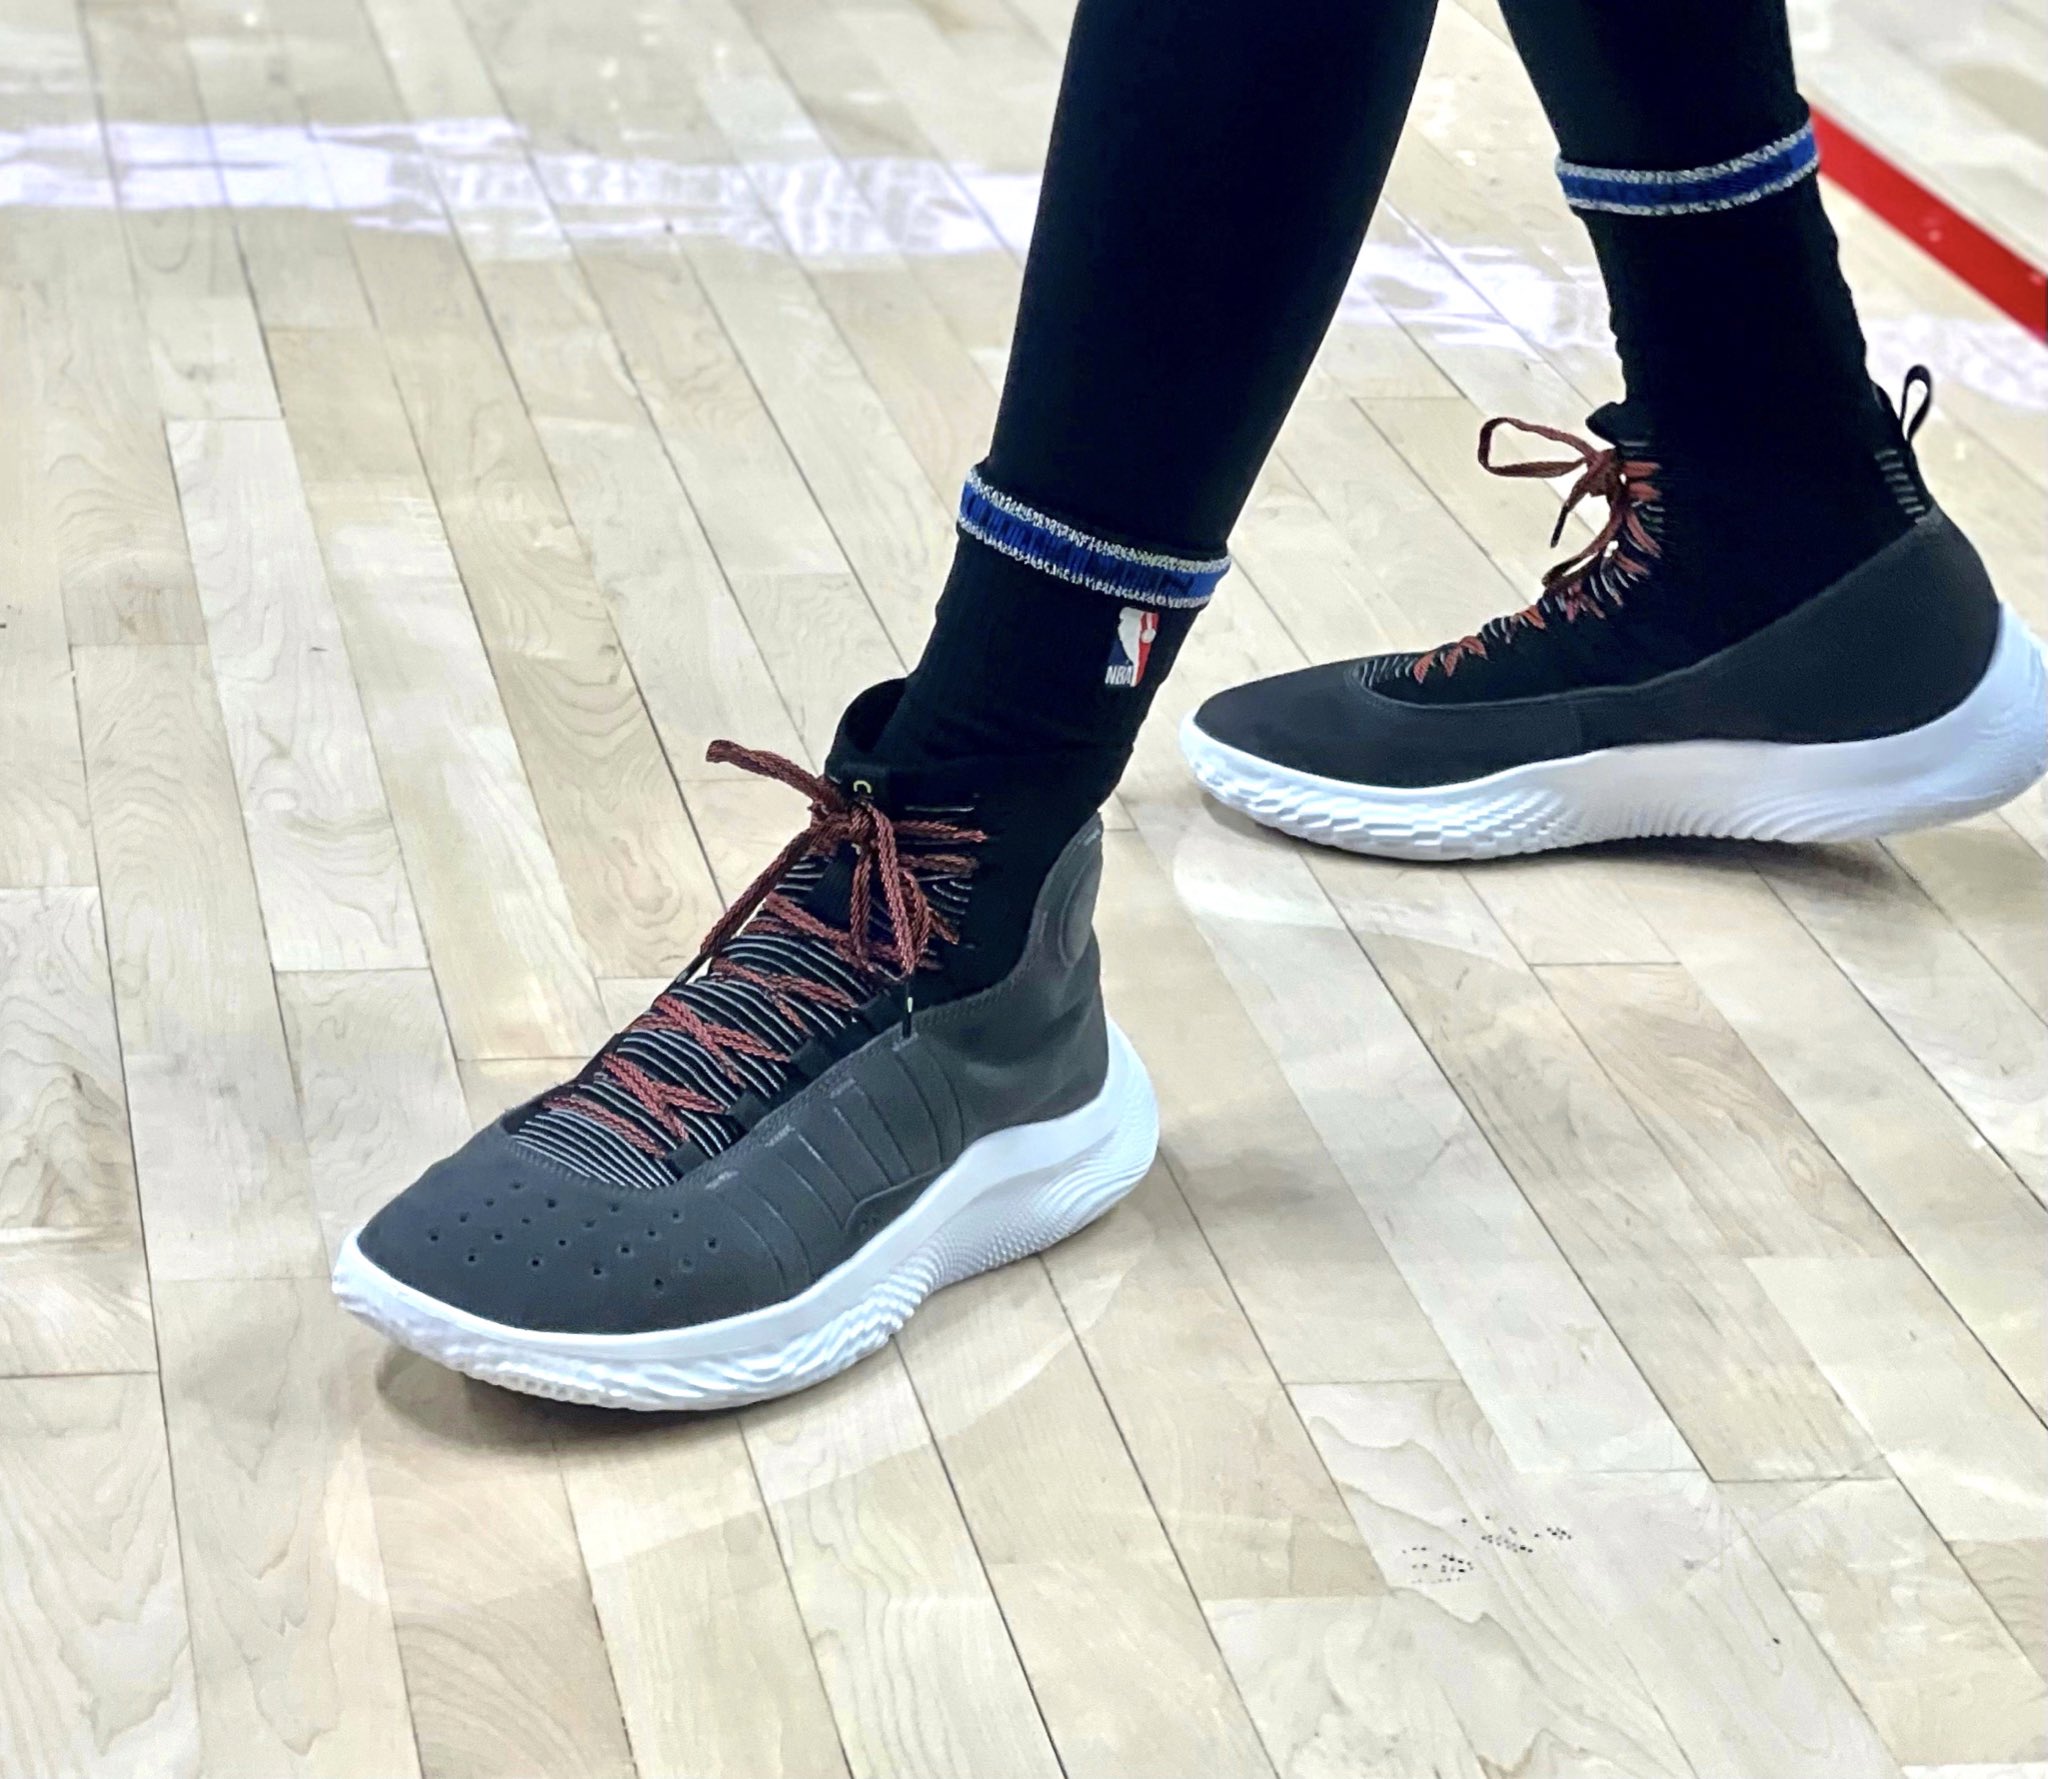 Por Centro de niños limpiar Nick DePaula on Twitter: "Stephen Curry is debuting the “Curry 4 Flowtro”  tonight — an upcoming Curry 4 retro remixed with Flow technology. Curry  Brand will also launch additional Flowtro models this